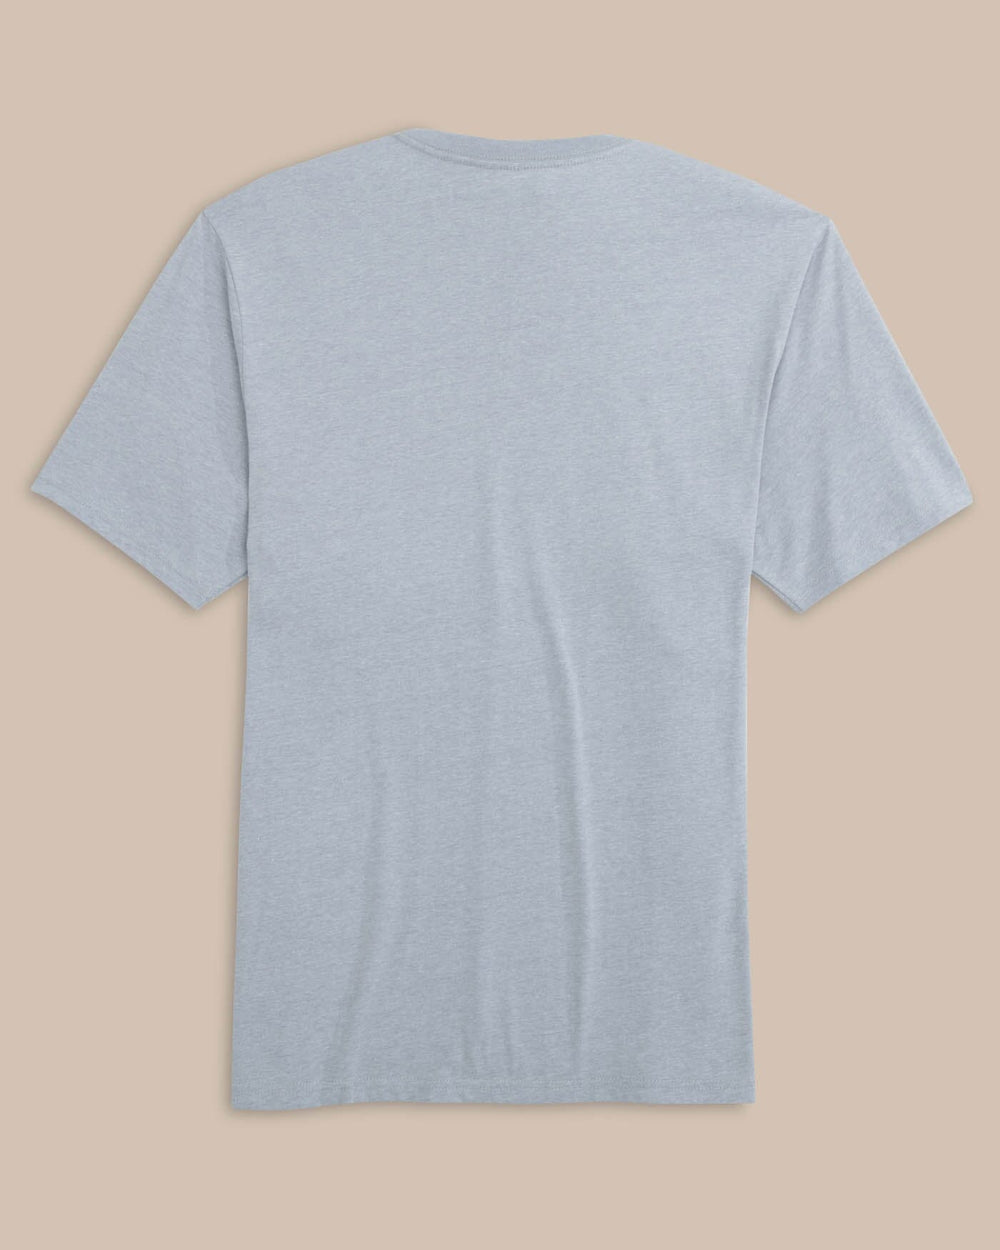 The back view of the Southern Tide Heather ST Banner Year Front Graphic Short Sleeve T-shirt by Southern Tide - Heather Platinum Grey